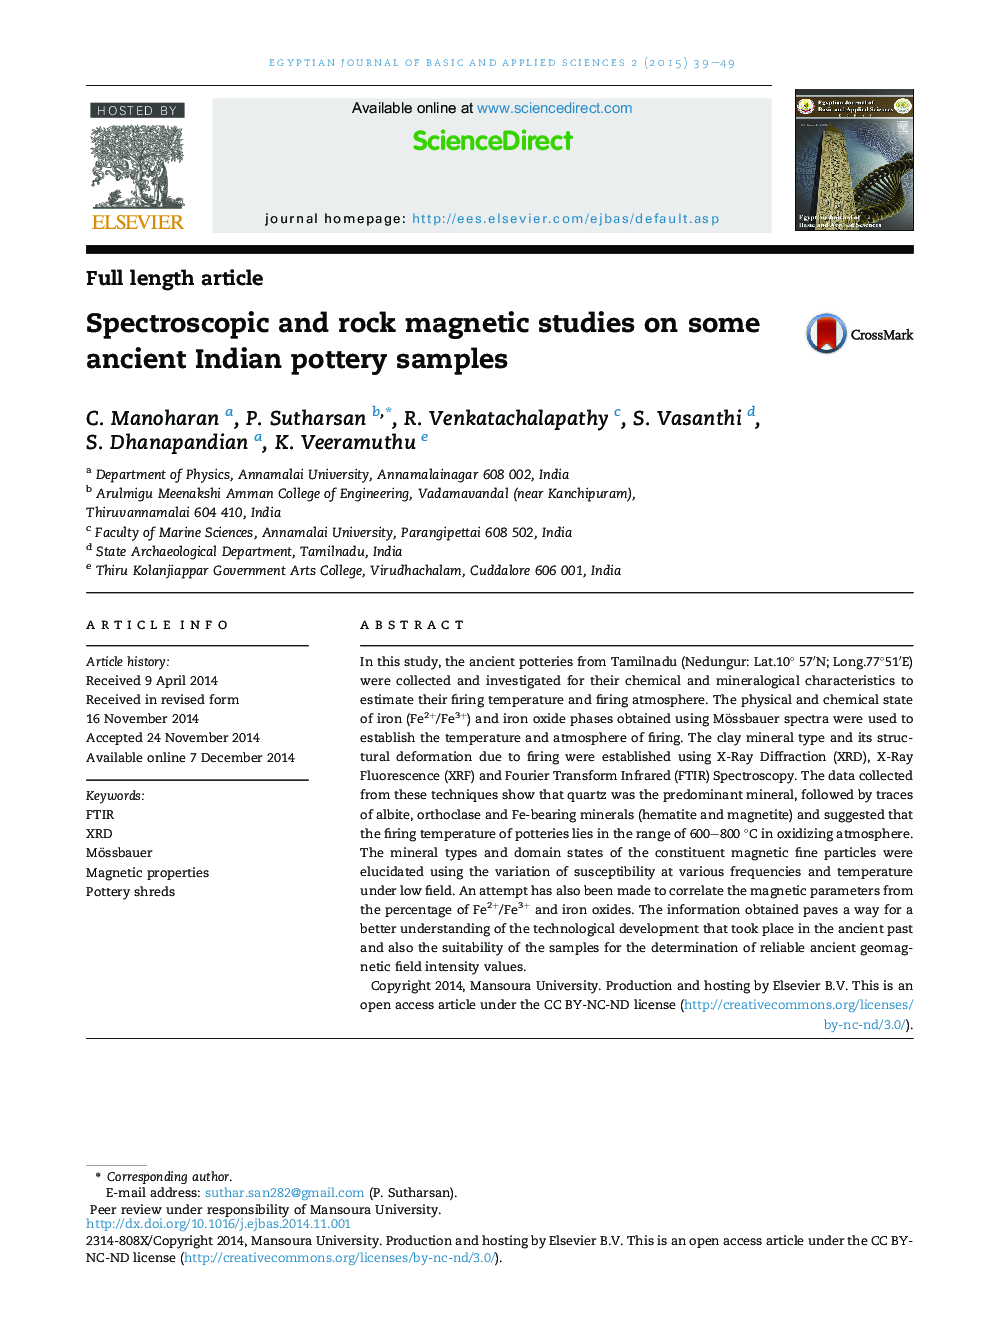 Spectroscopic and rock magnetic studies on some ancient Indian pottery samples 